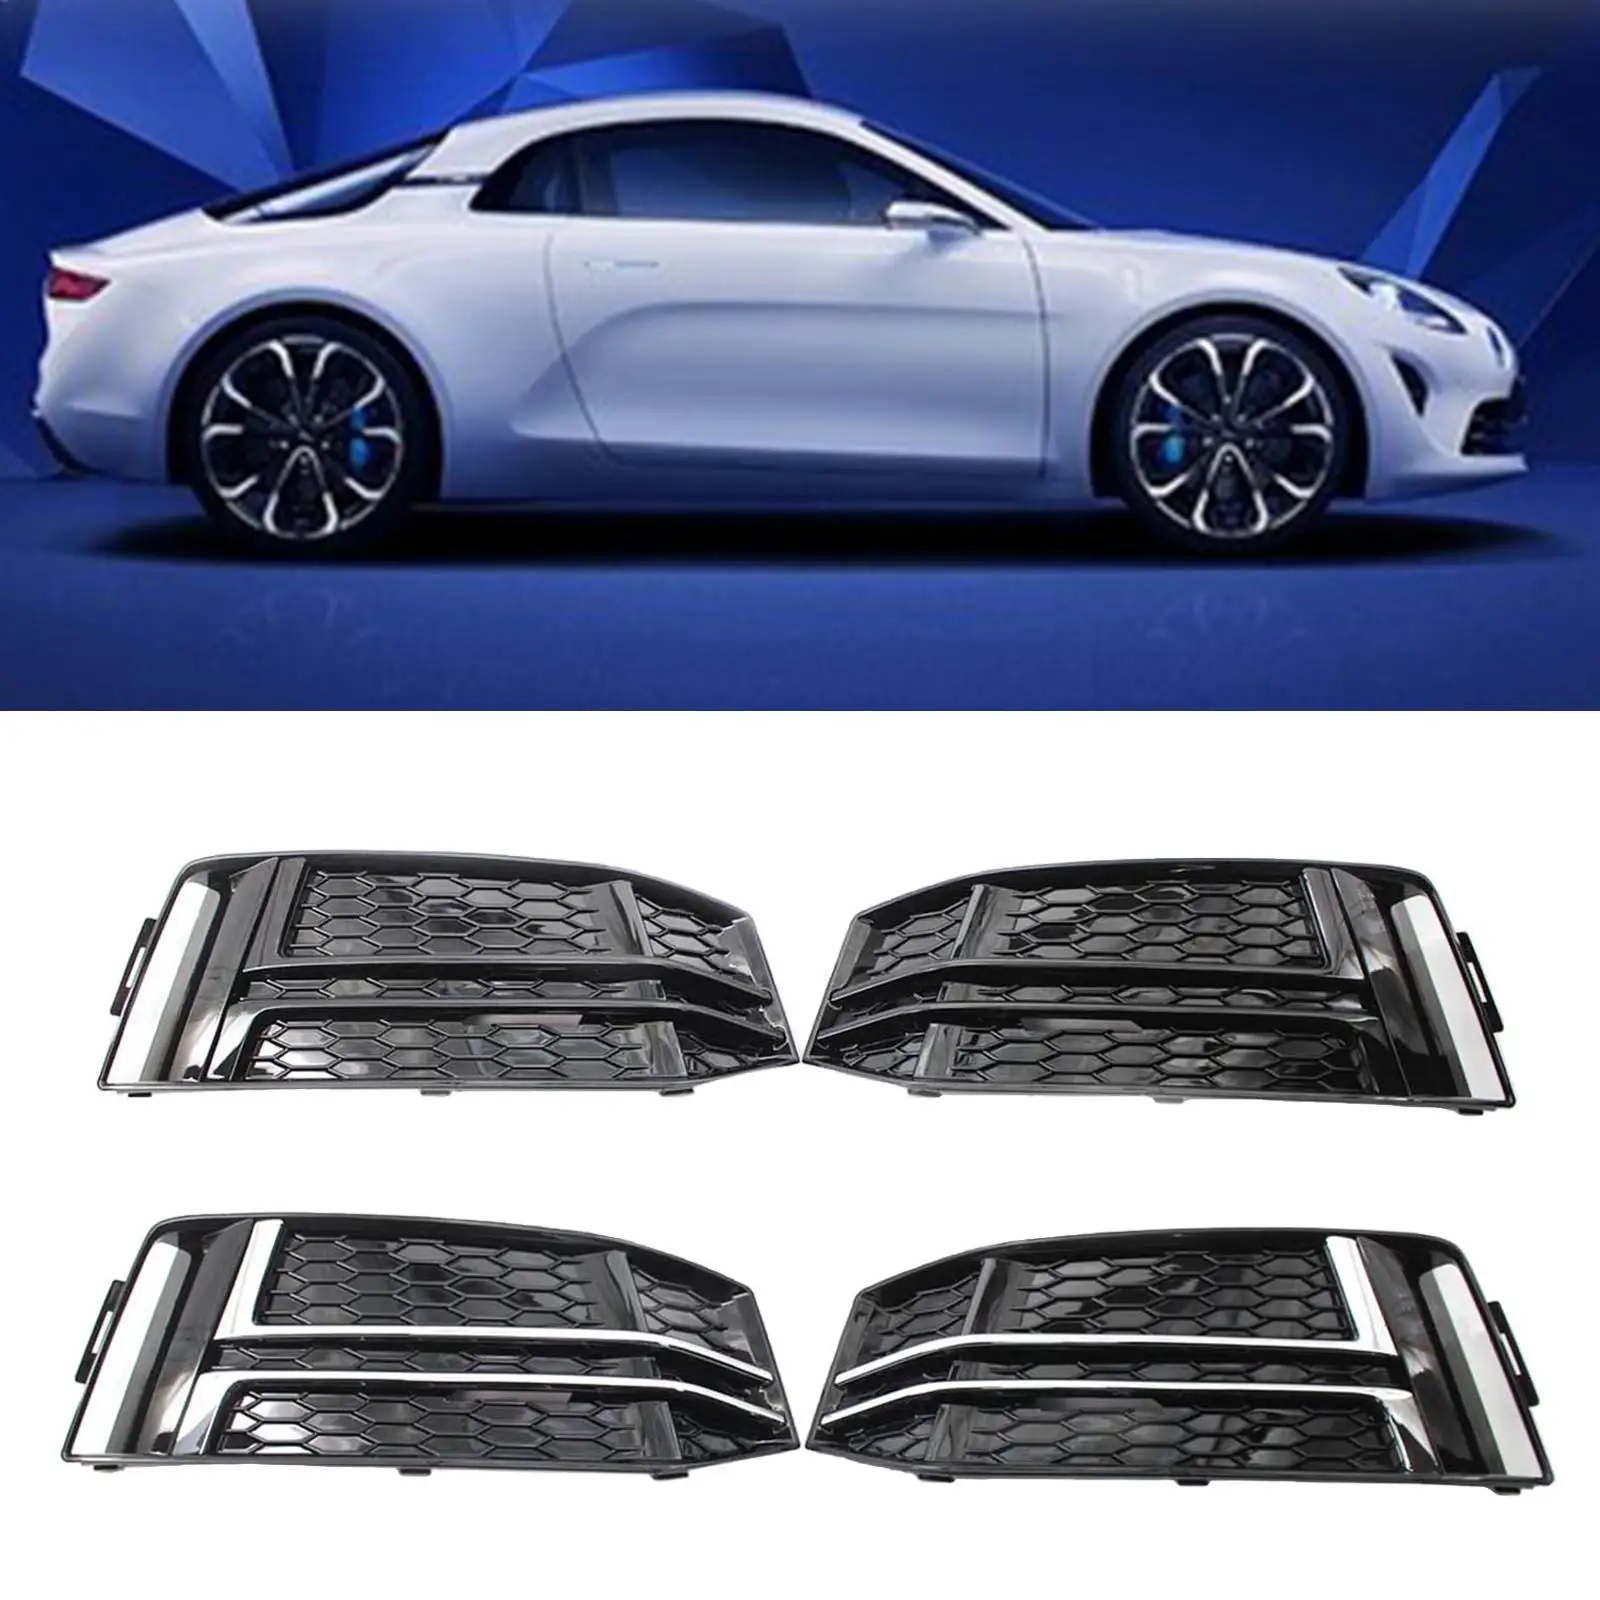 Set of 2 Light Grille Grill Cover for audi A4 B9 8W0807681F